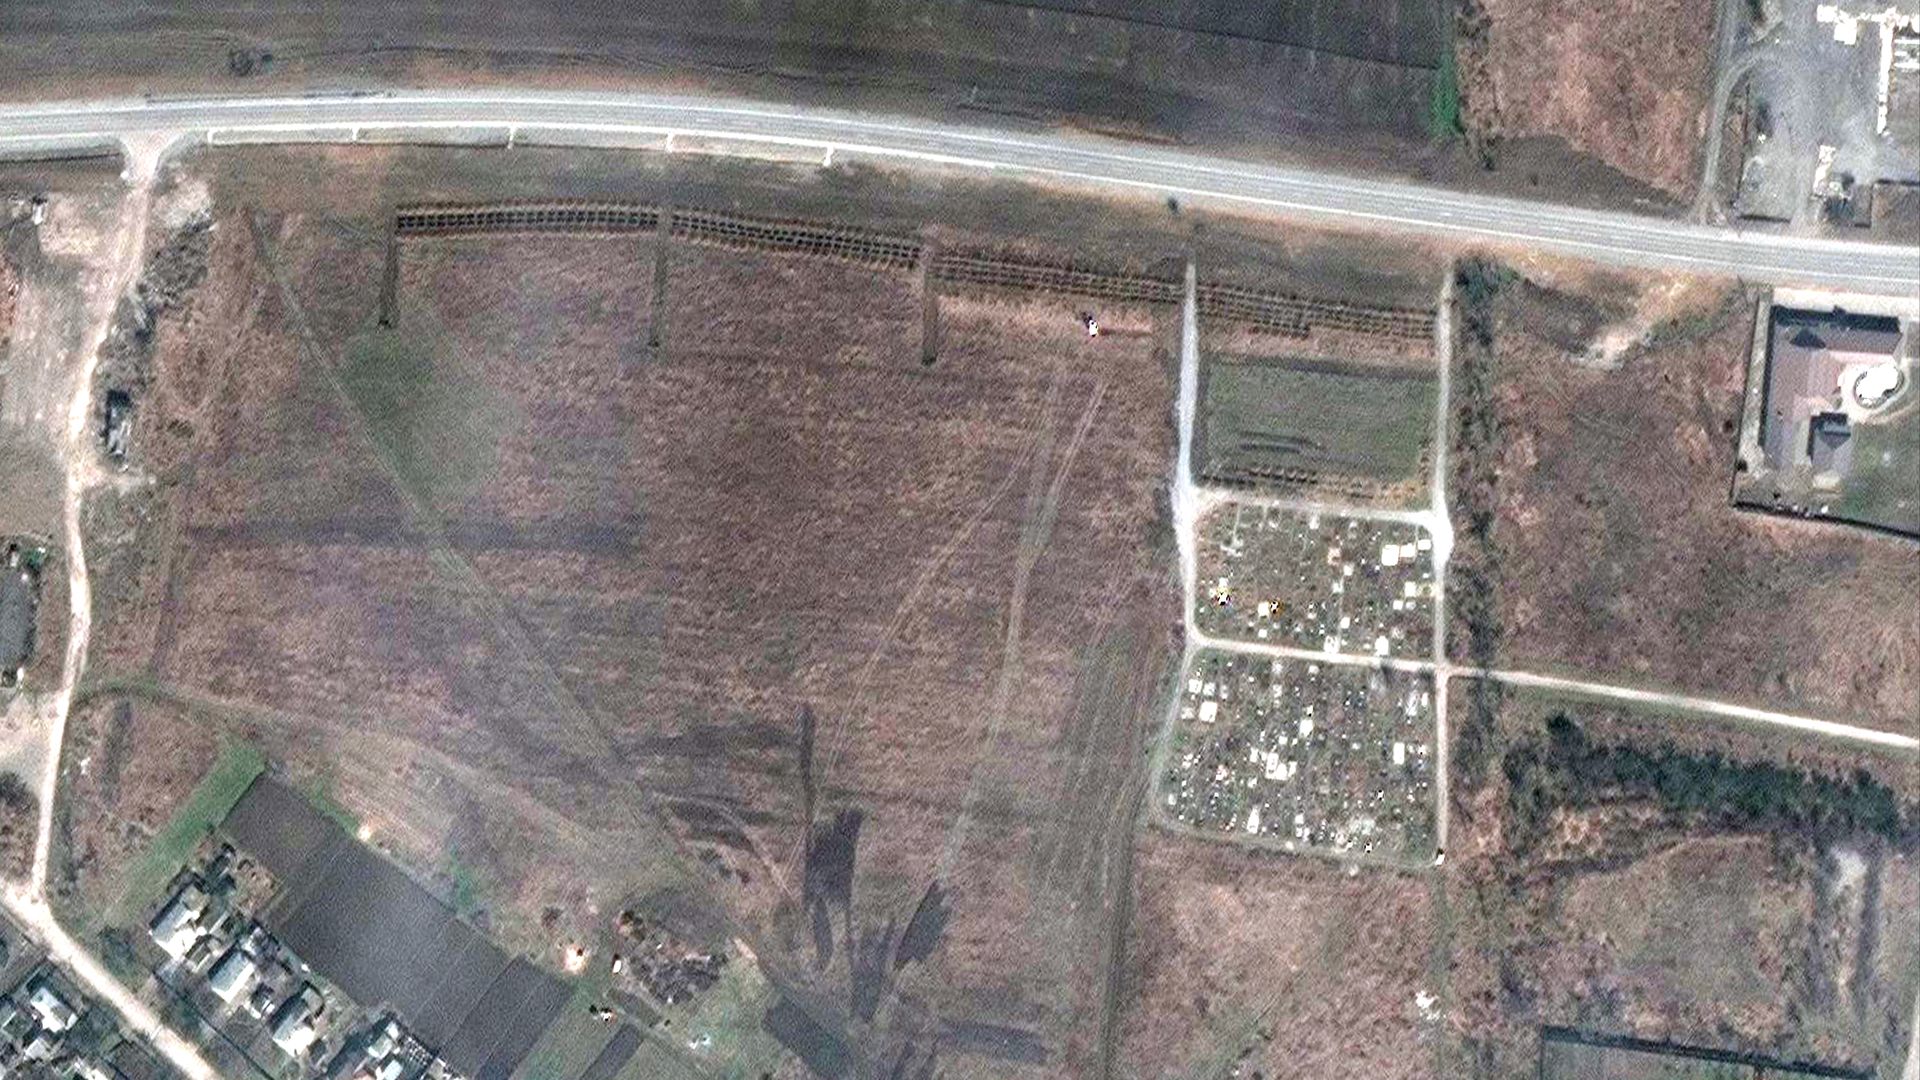 A satellite image showing a mass grave site near an existing graveyard in the village of Manhush, Ukraine, situated roughly 12 miles from Mariupol.